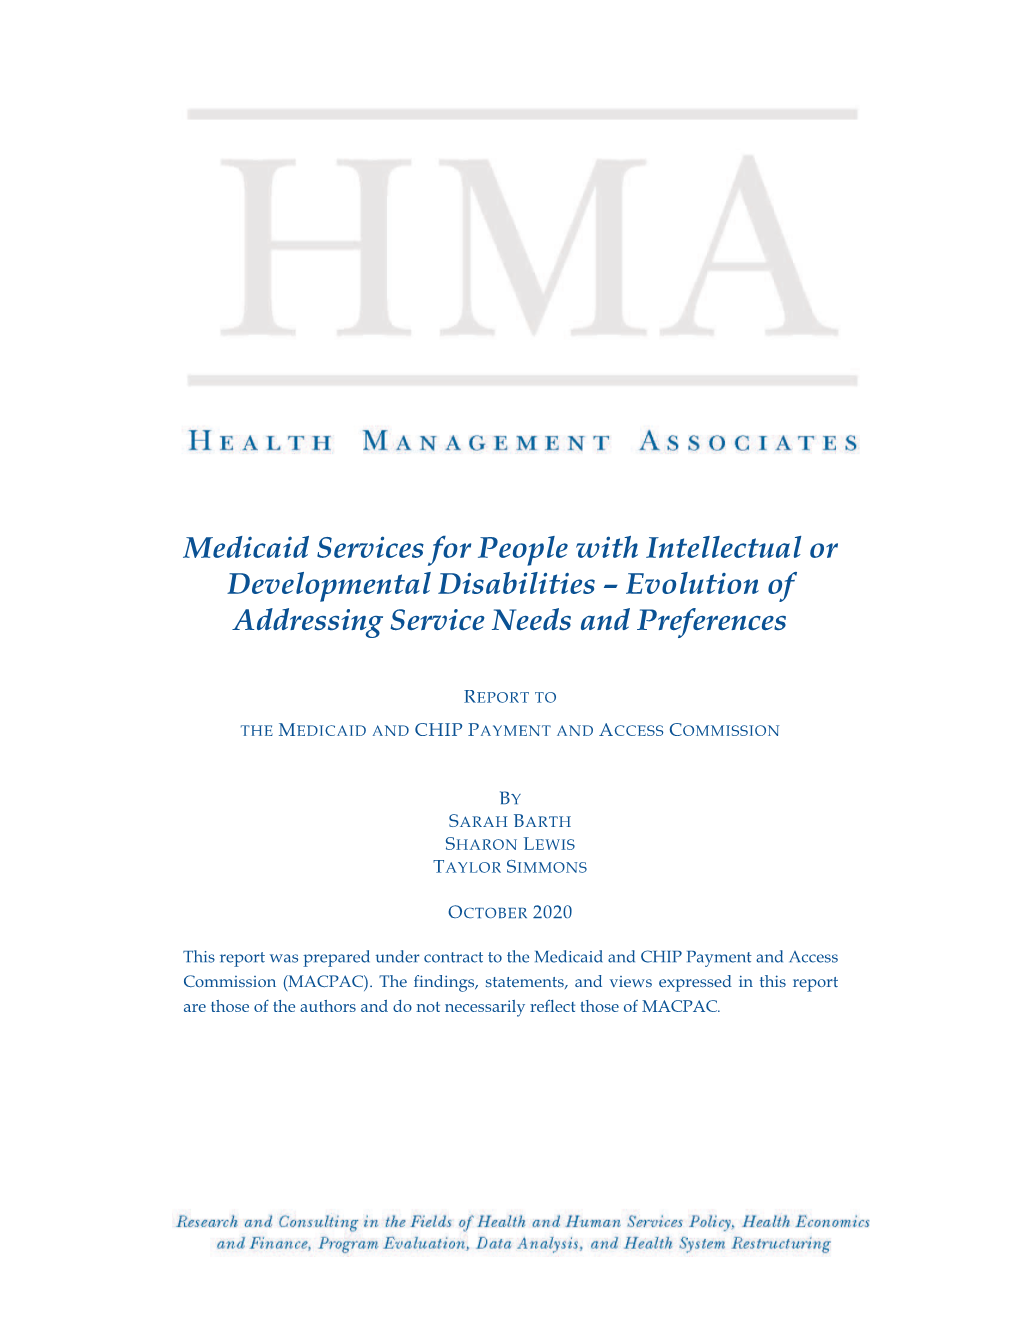 Medicaid Services for People with Intellectual Or Developmental Disabilities – Evolution of Addressing Service Needs and Preferences